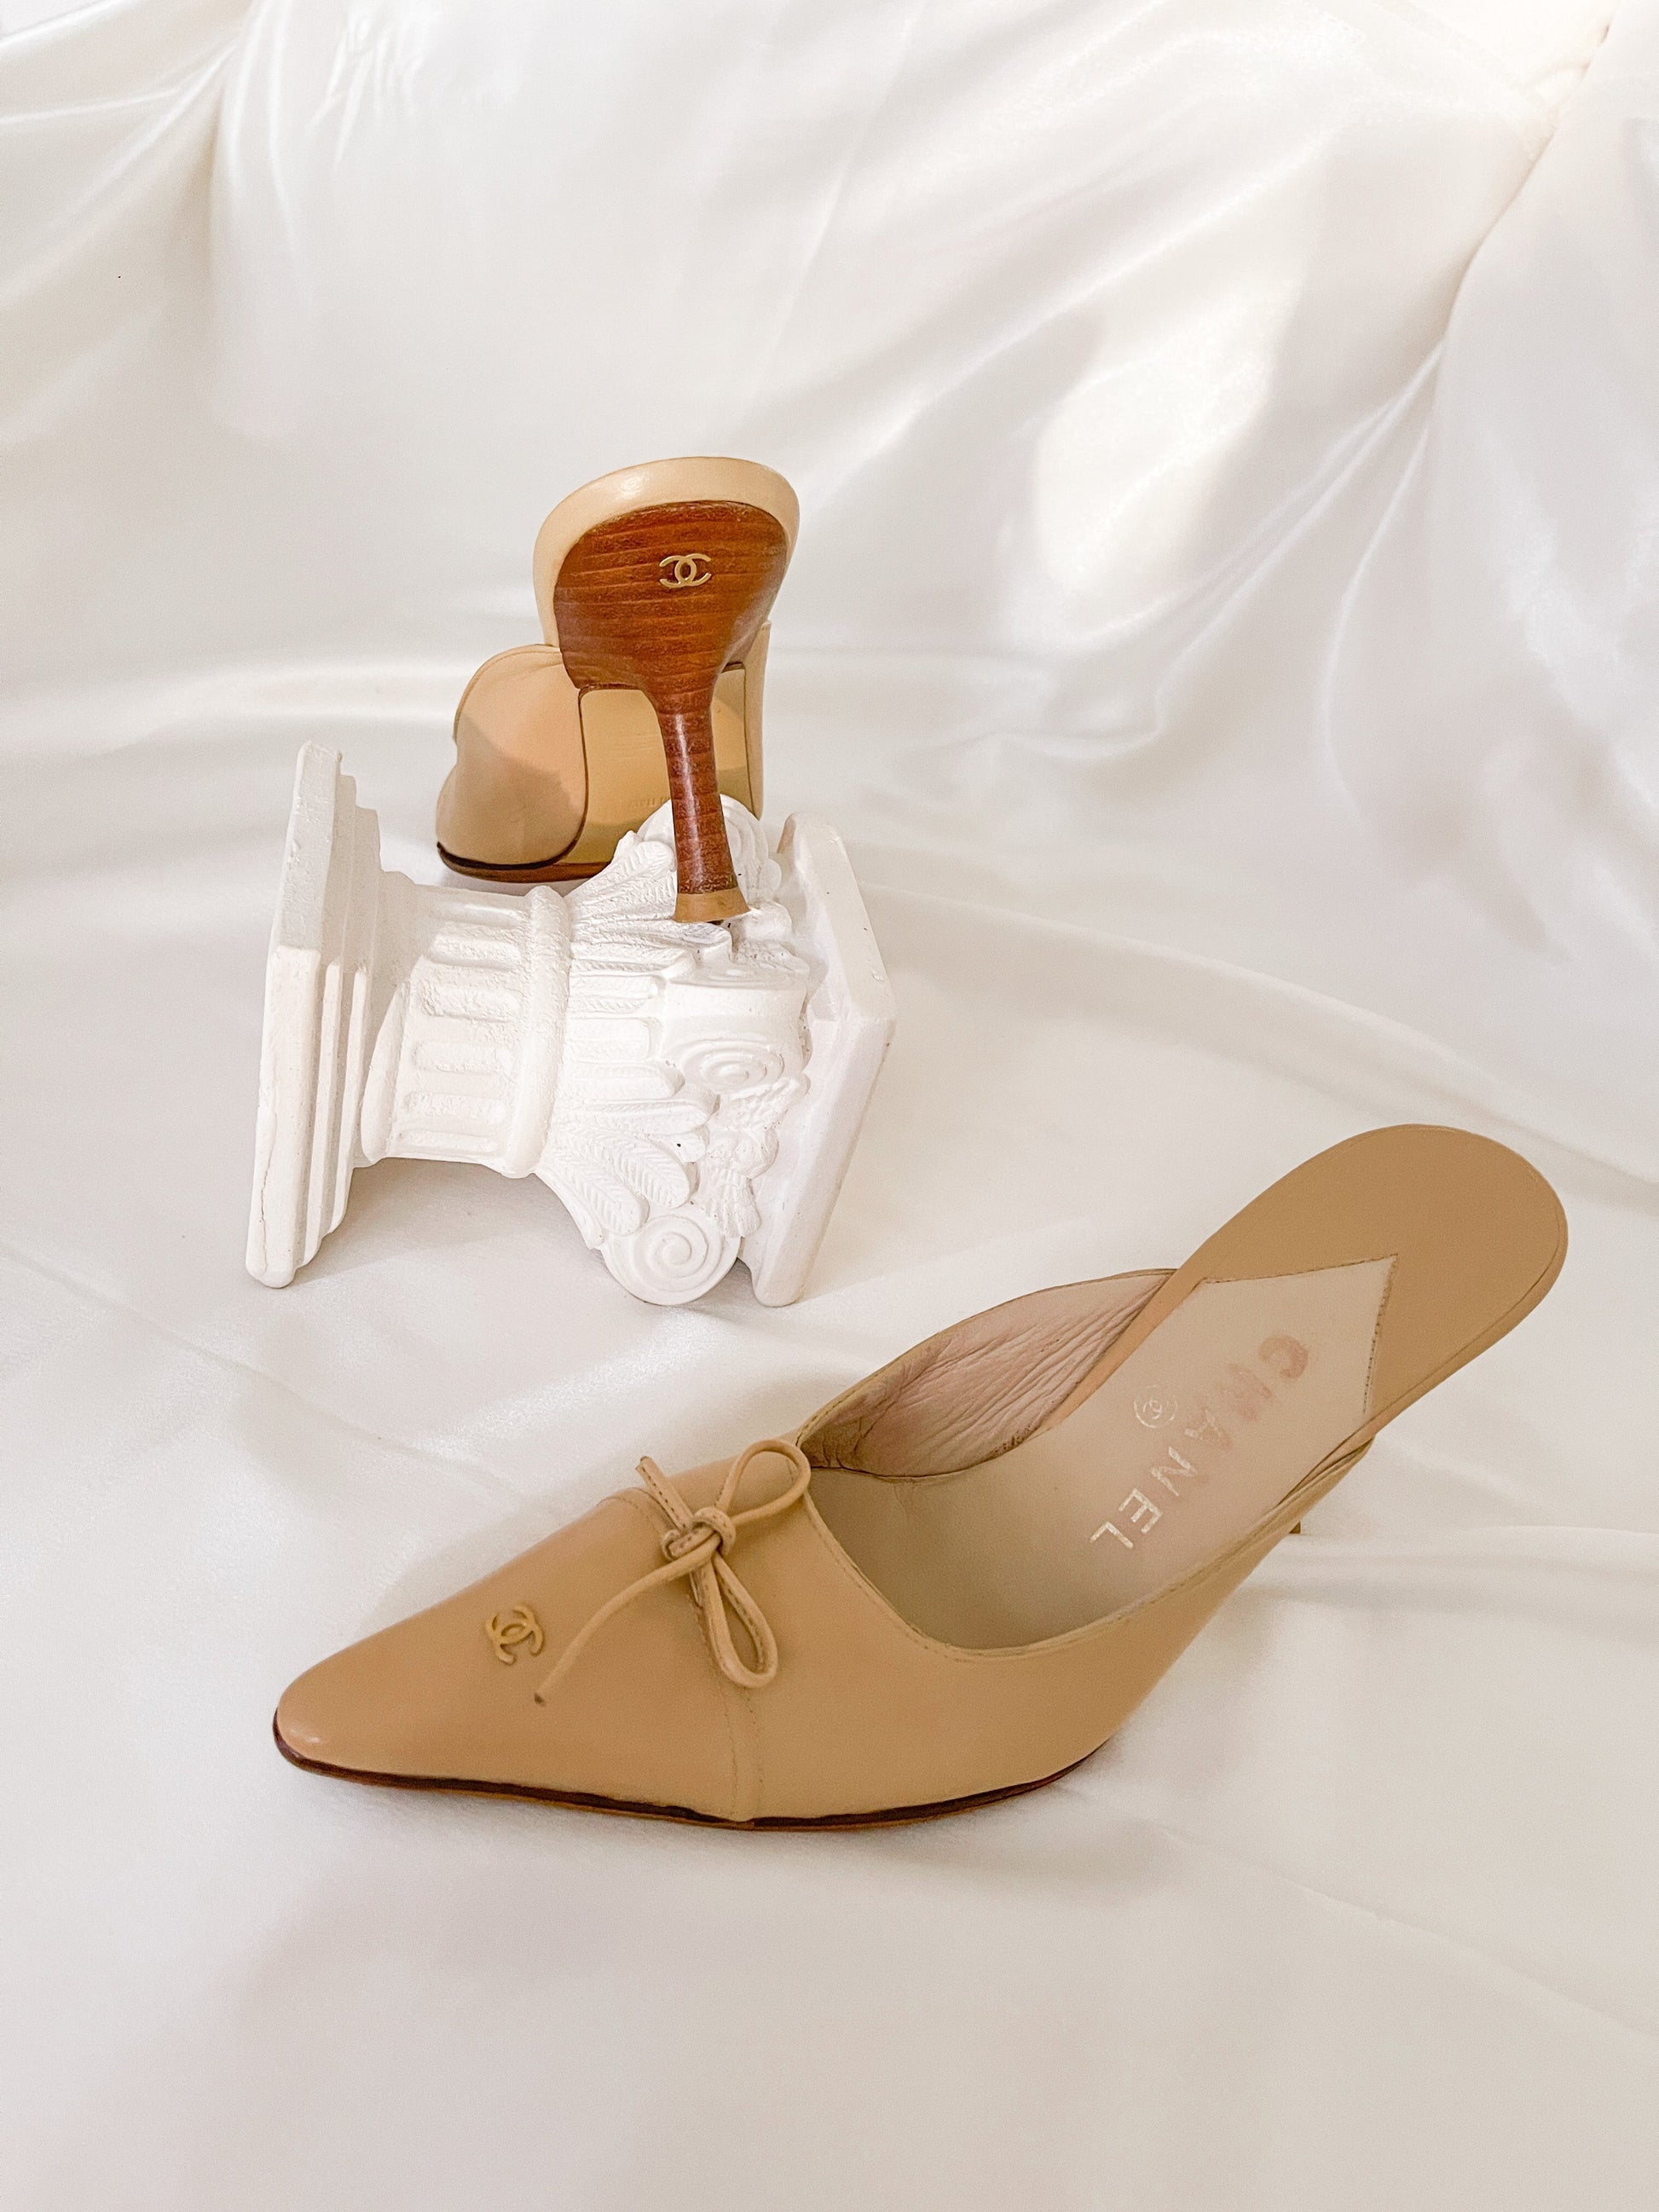 Vintage Louis Vuitton Beige Pumps/Heels with Pointed Toe